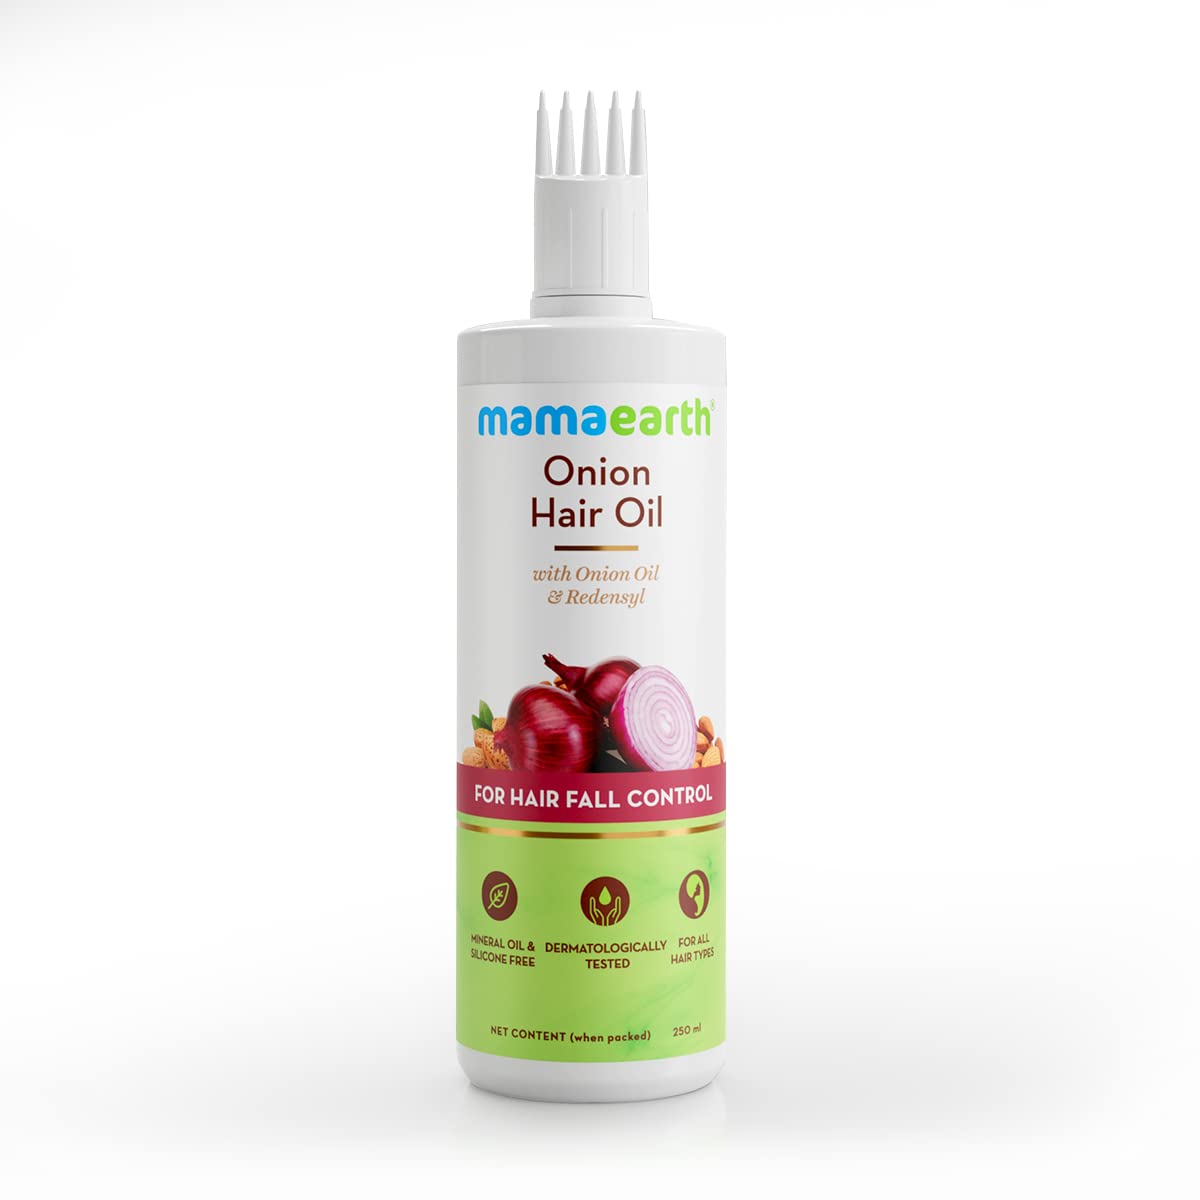 Oil your Hair the Right Way with Mamaearth Onion Hair Oil | Champi the  right way for stronger, thicker hair! 💕👩🏻 Nourish your scalp and hair  with the natural goodness of Onions